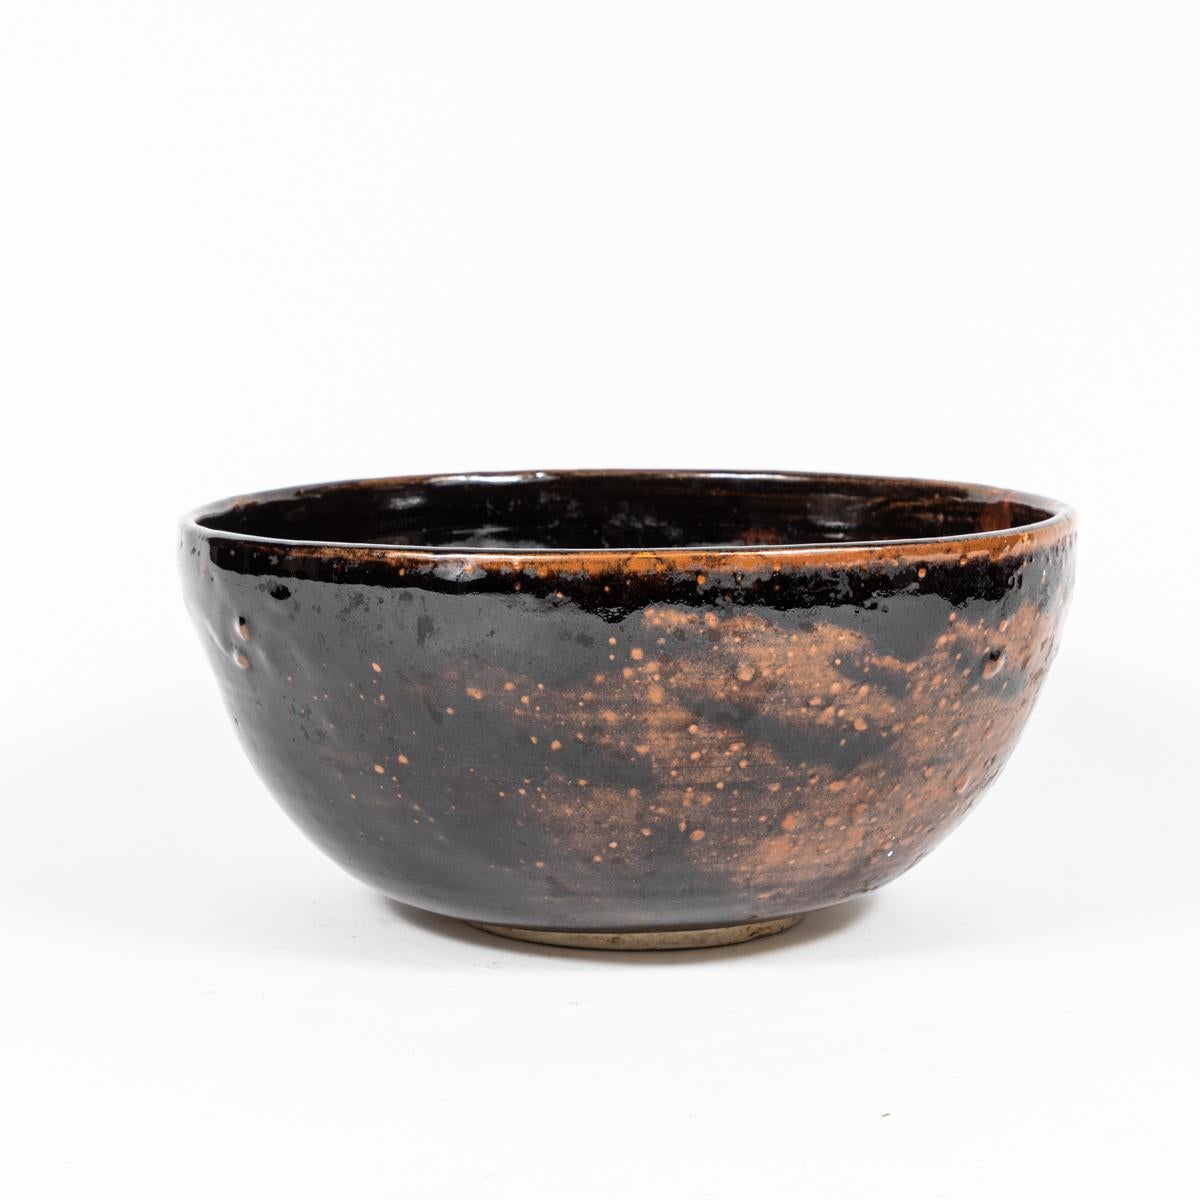 This studio pottery pot made in mid 1900s England has a deep brown coloration and glazed finish. It is 12 inches wide and 6 inches in height, making it an appropriate size for serving, or display on a counter top. 